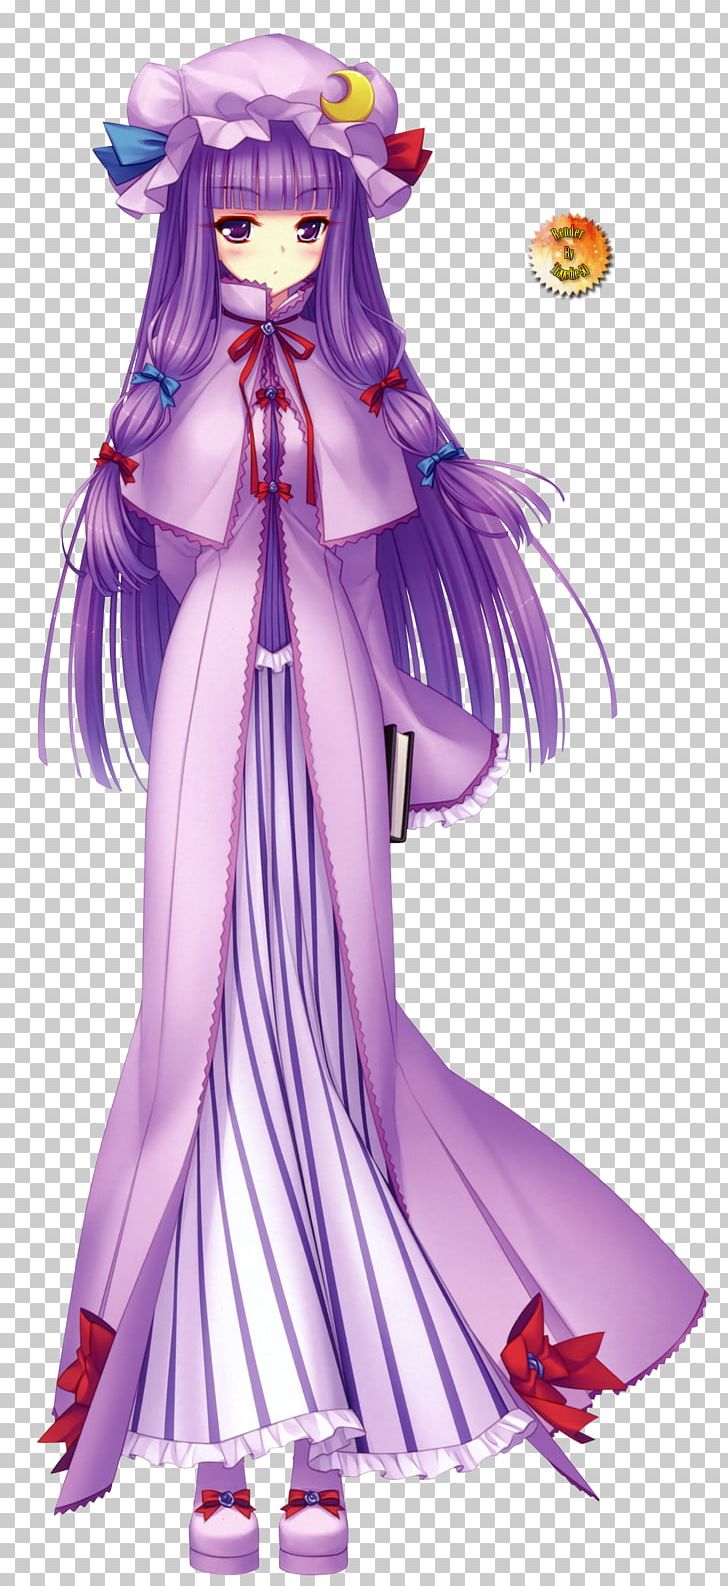 Touhou Project Knowledge Alice Margatroid Patchouli PNG, Clipart, Anime, Cg Artwork, Cirno, Clothing, Costume Free PNG Download